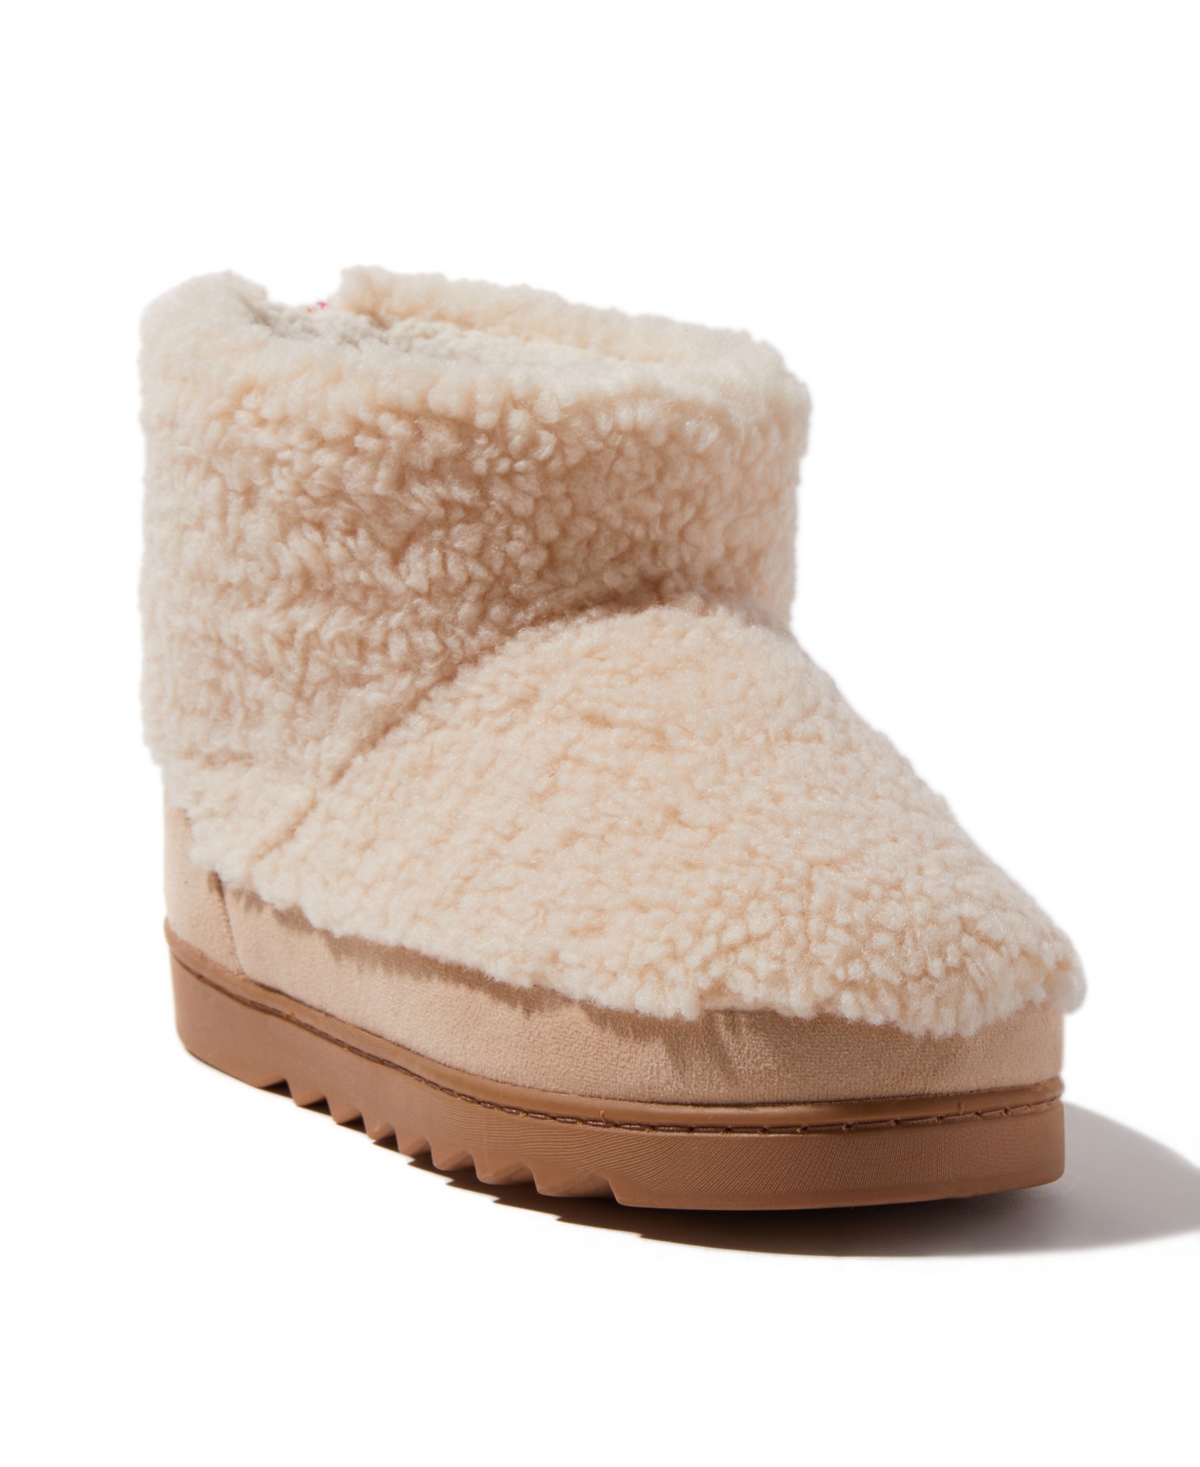 Women's Whitney Teddy Bootie Slippers - CrÃ¨me Brulee